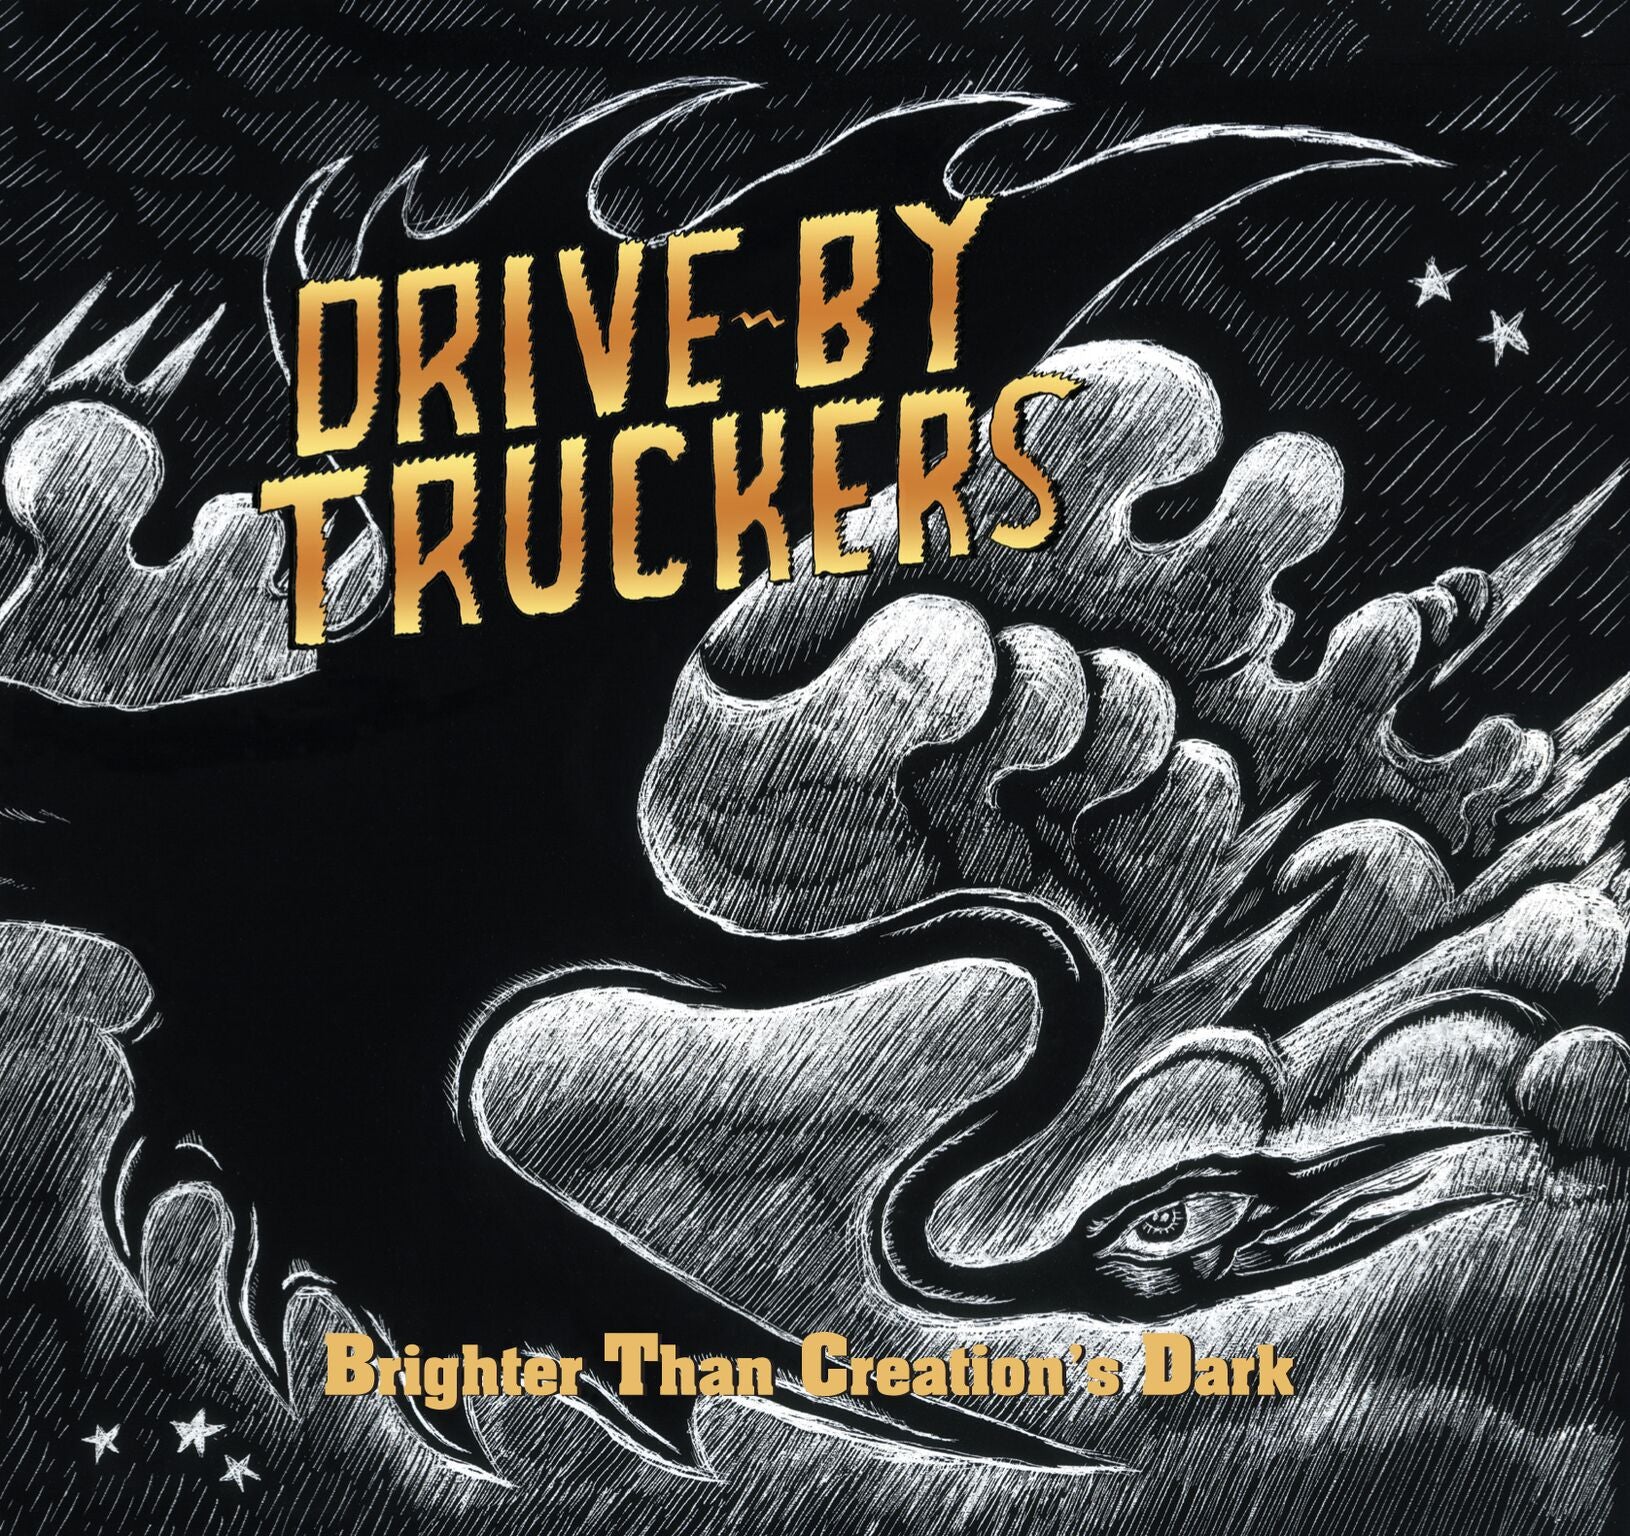 Drive-By Truckers - Brighter Than Creation's Dark [CD]